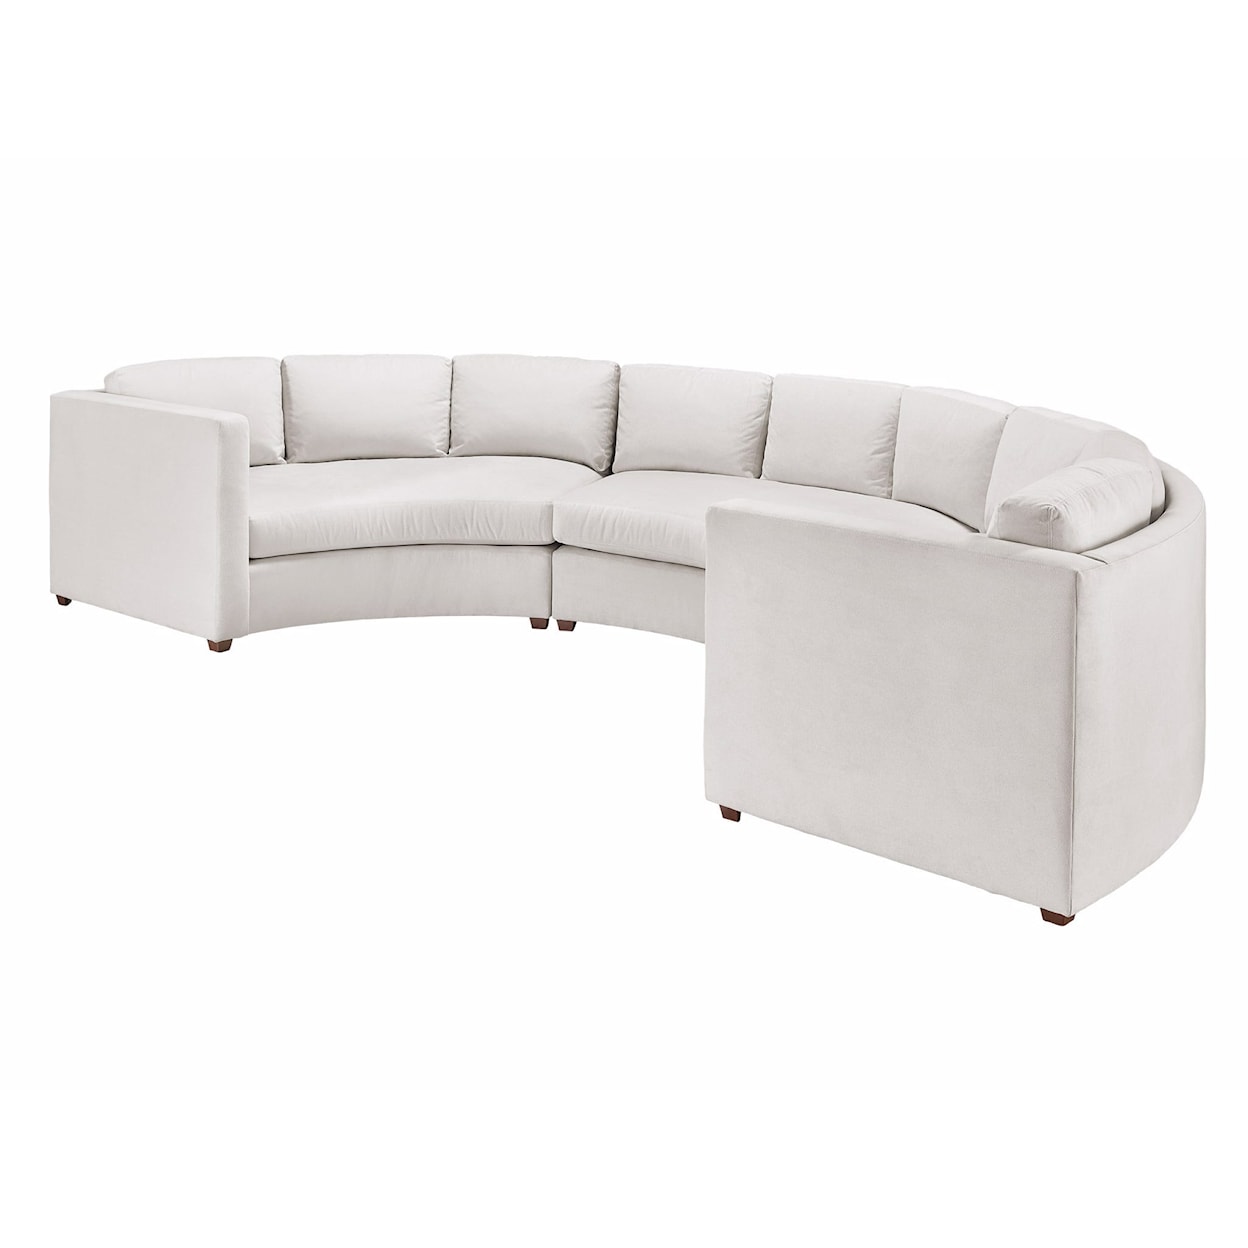 Universal Nomad 3-Piece Sectional Sofa